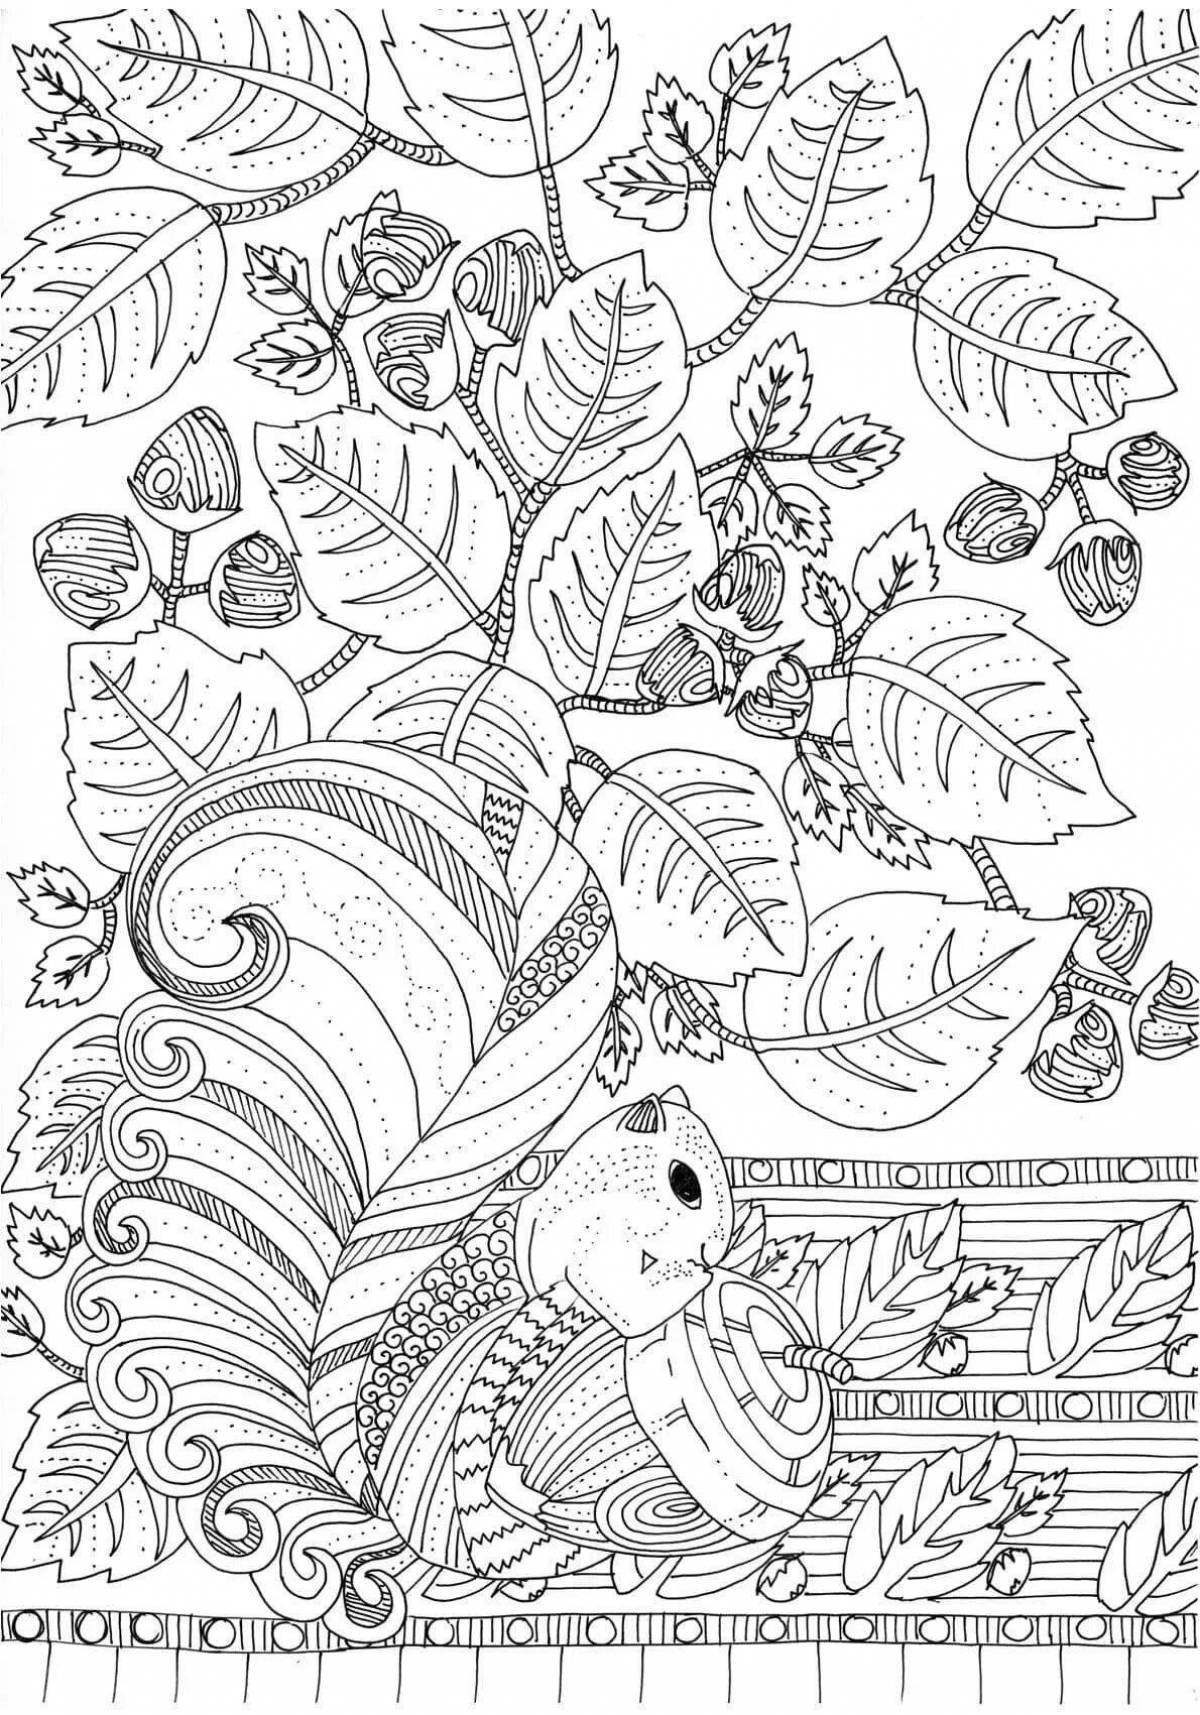 Peaceful simple coloring for adults